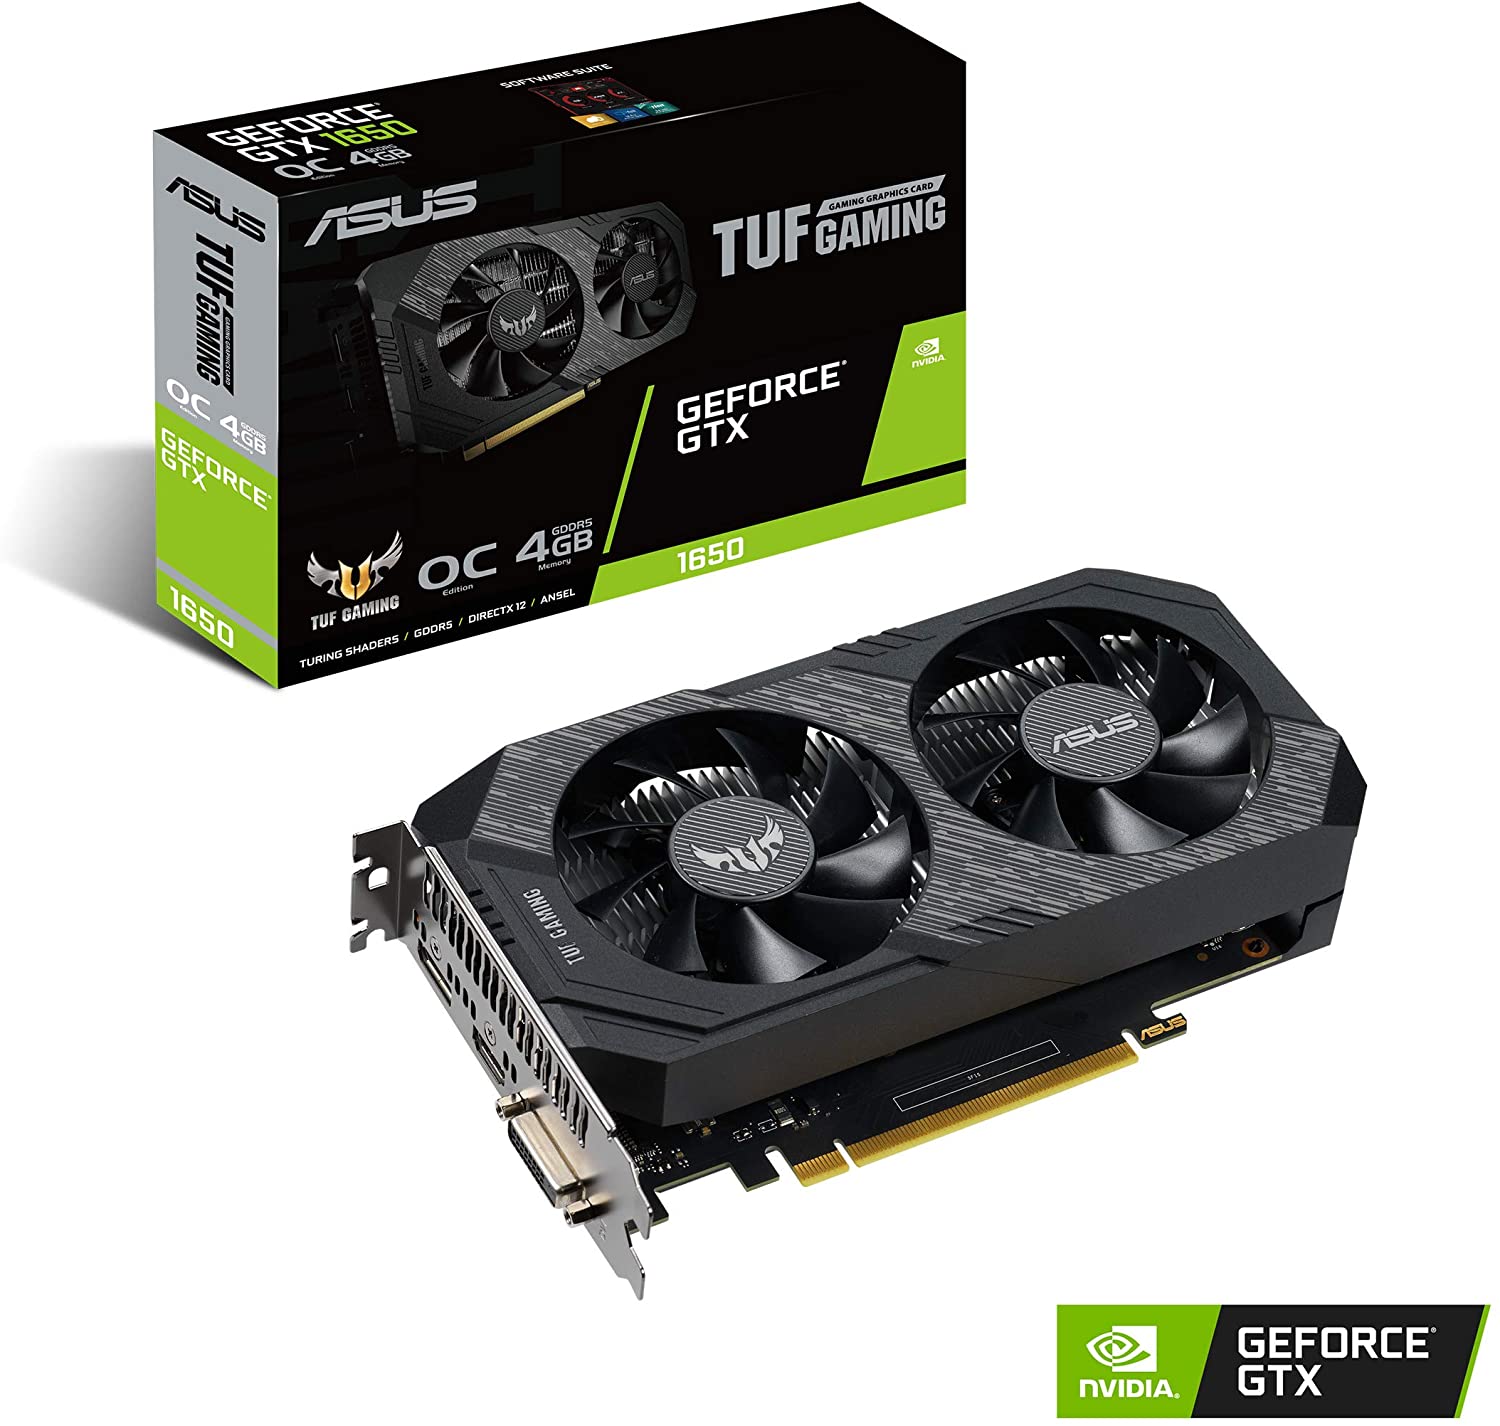 ASUS TUF Gaming NVIDIA GeForce GTX 1650 OC Edition Graphics Card (PCIe 3.0, 4GB GDDR6 Memory, HDMI, DisplayPort, DVI-D, 1x 6-pin Power Connector, IP5X Dust Resistance, Space-Grade Lubricant)